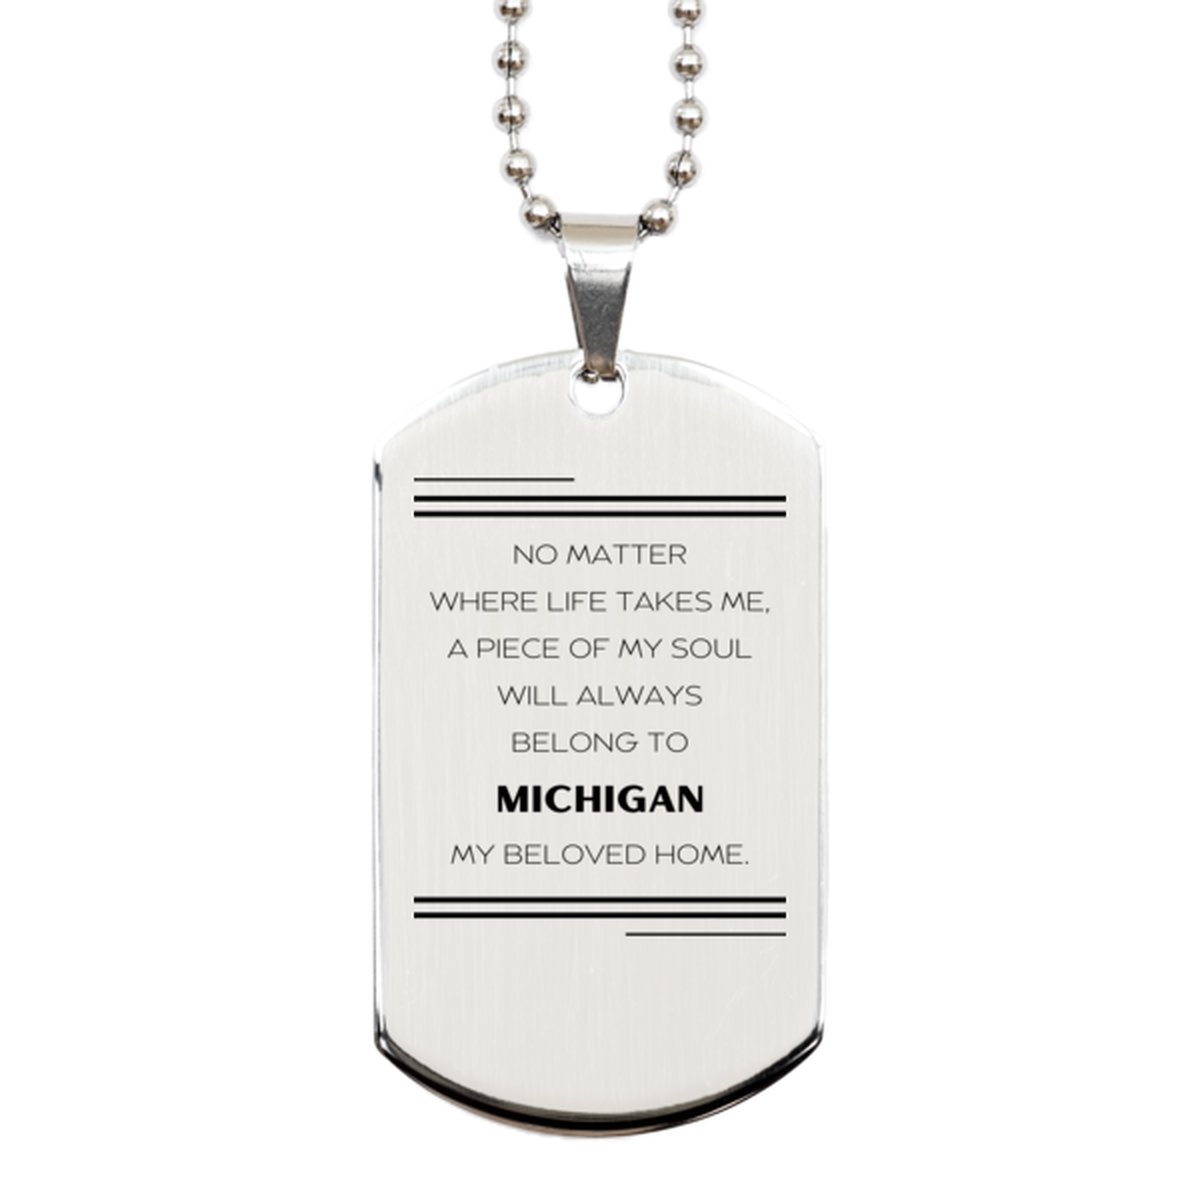 Love Michigan State Gifts, My soul will always belong to Michigan, Proud Silver Dog Tag, Birthday Unique Gifts For Michigan Men, Women, Friends